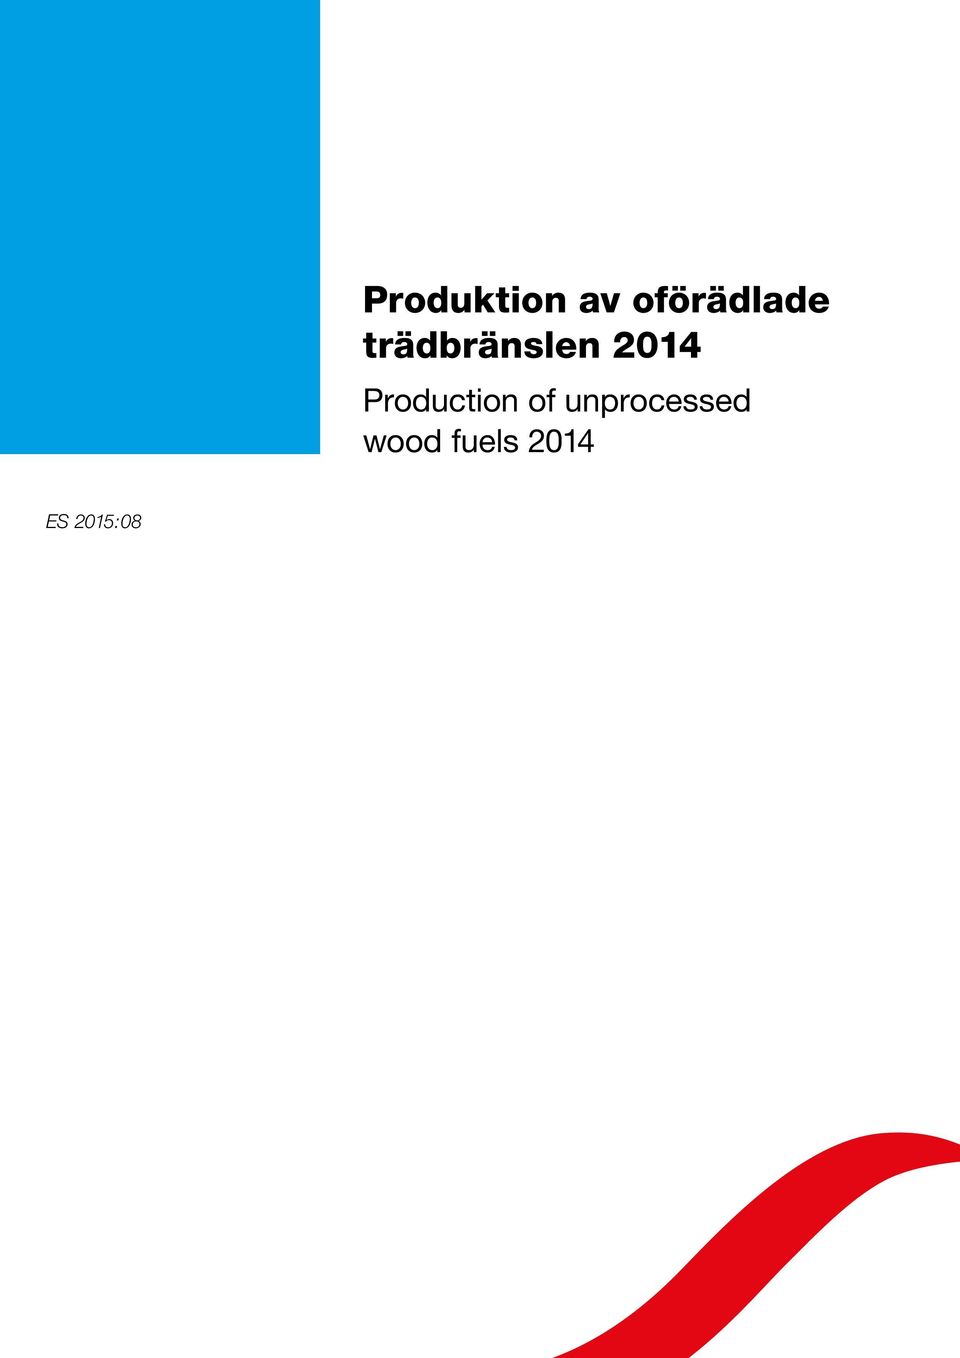 2014 Production of